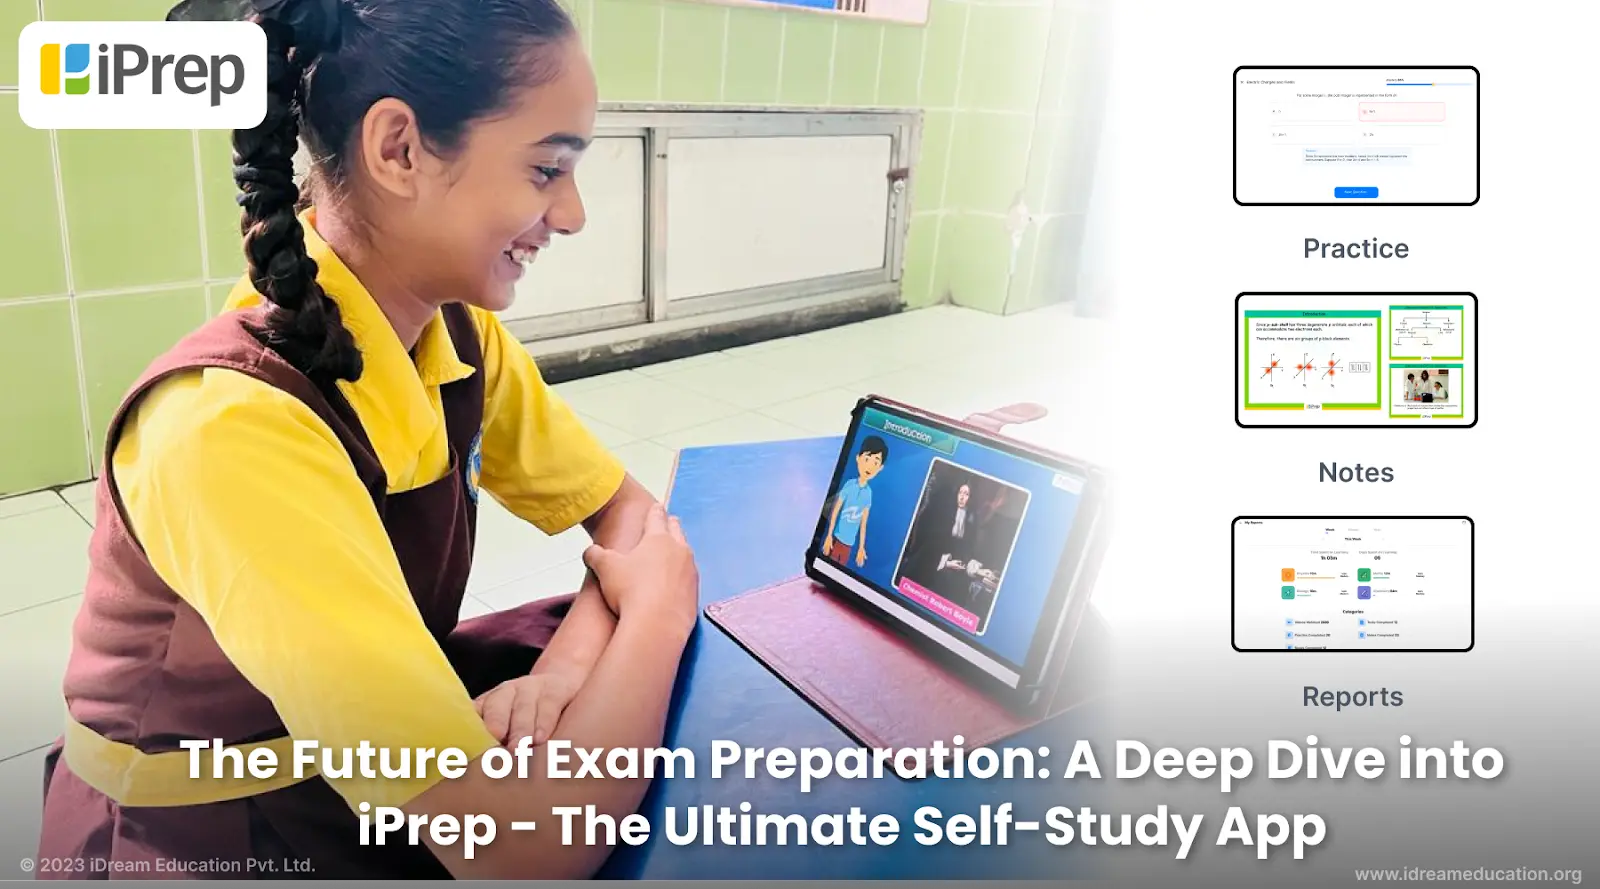 An illustration portraying a school student utilizing the iPrep Self-Study on a tablet for examination preparation.